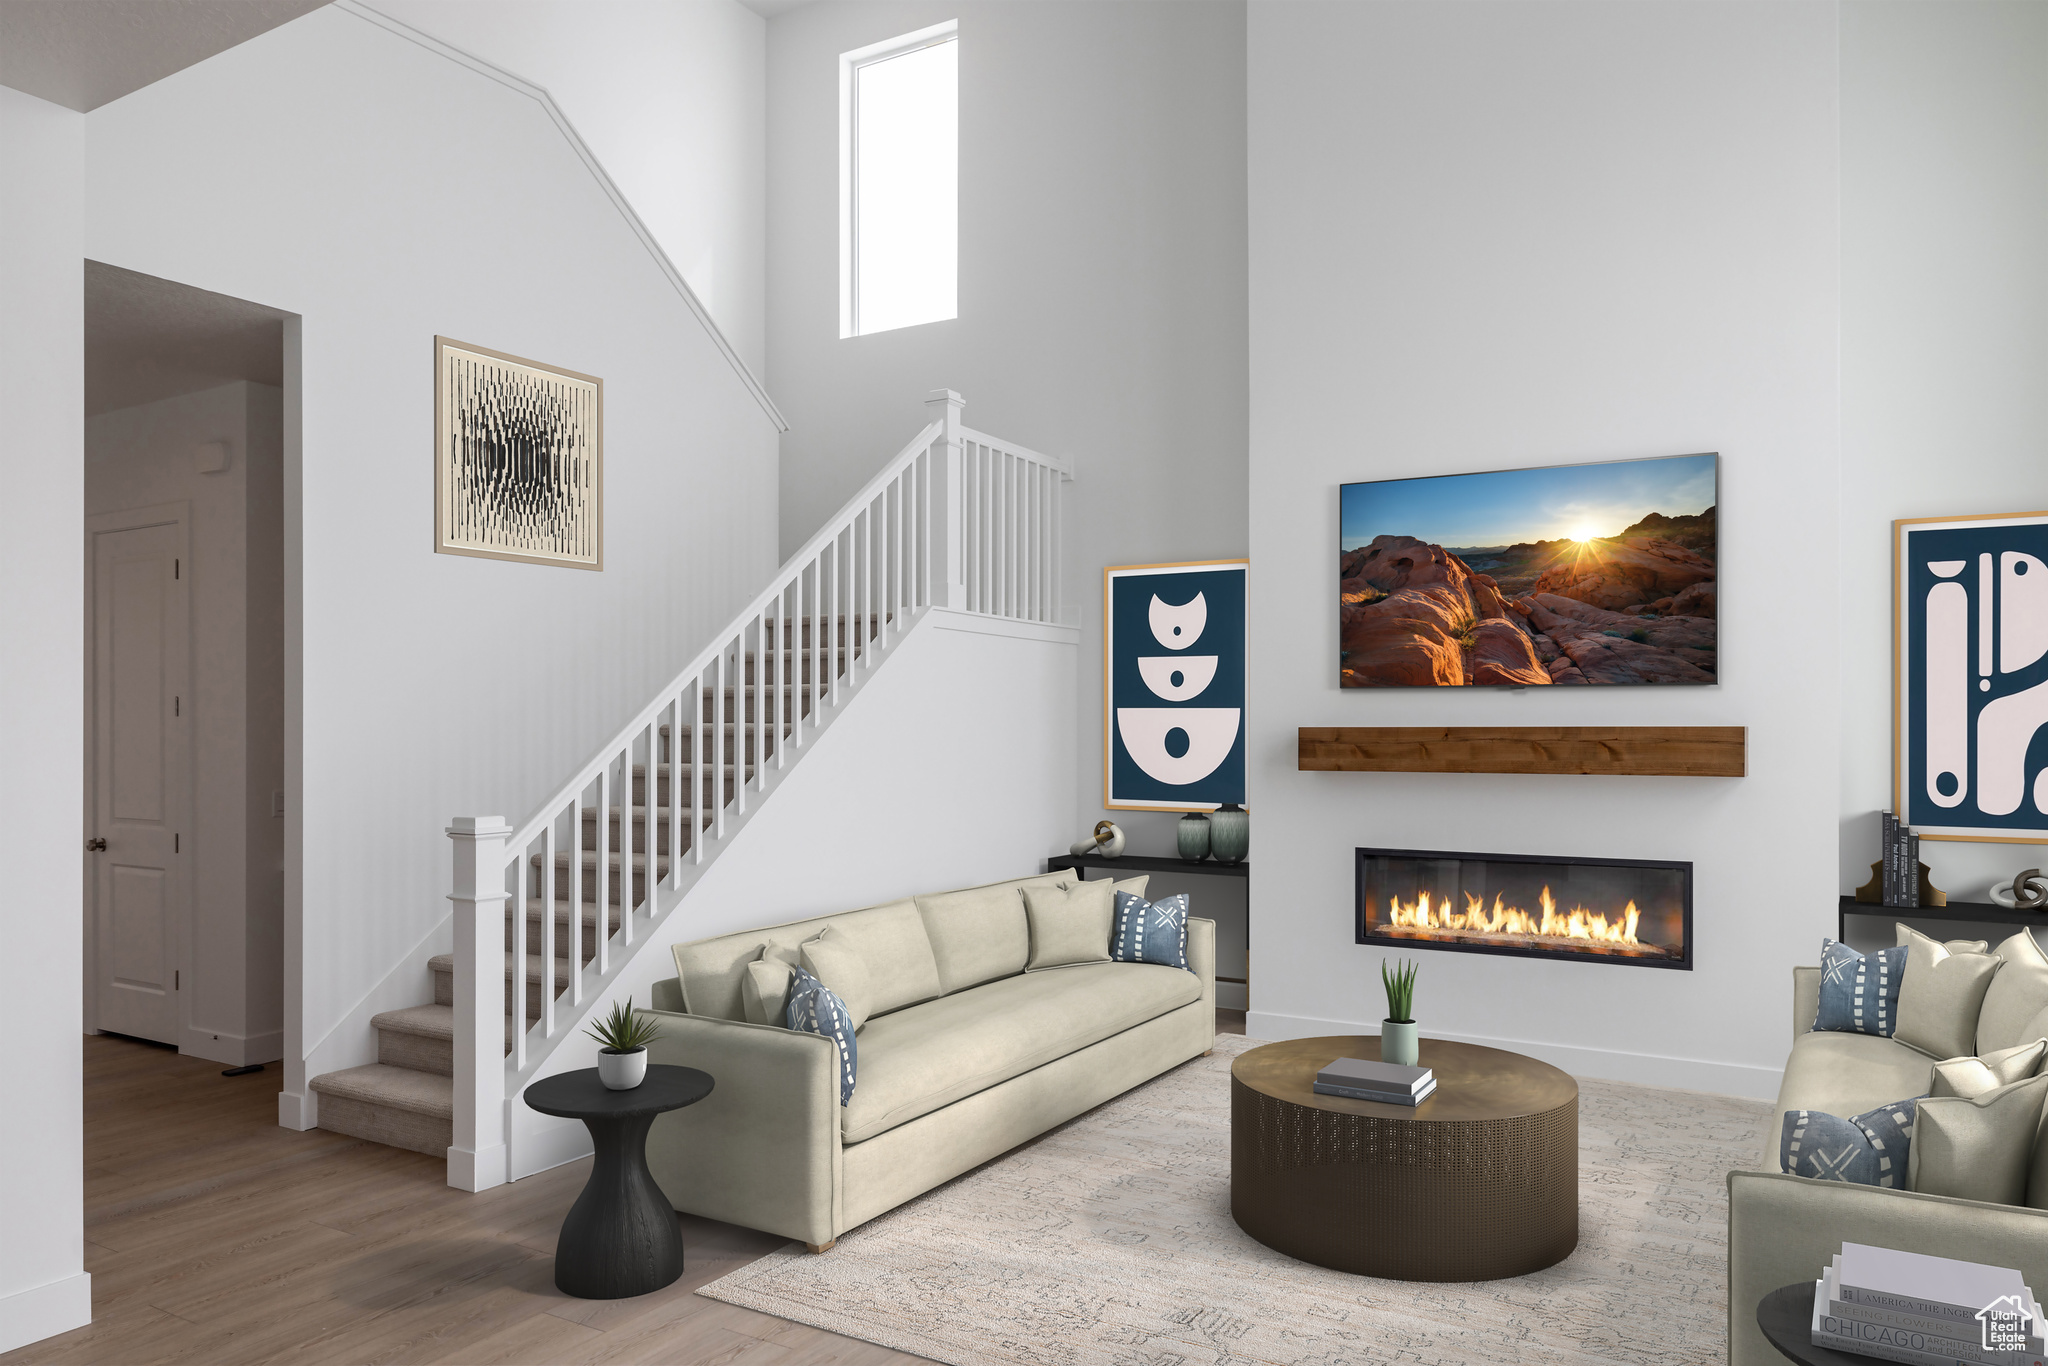 Example photo actual stair railing, fireplace and colors may be different